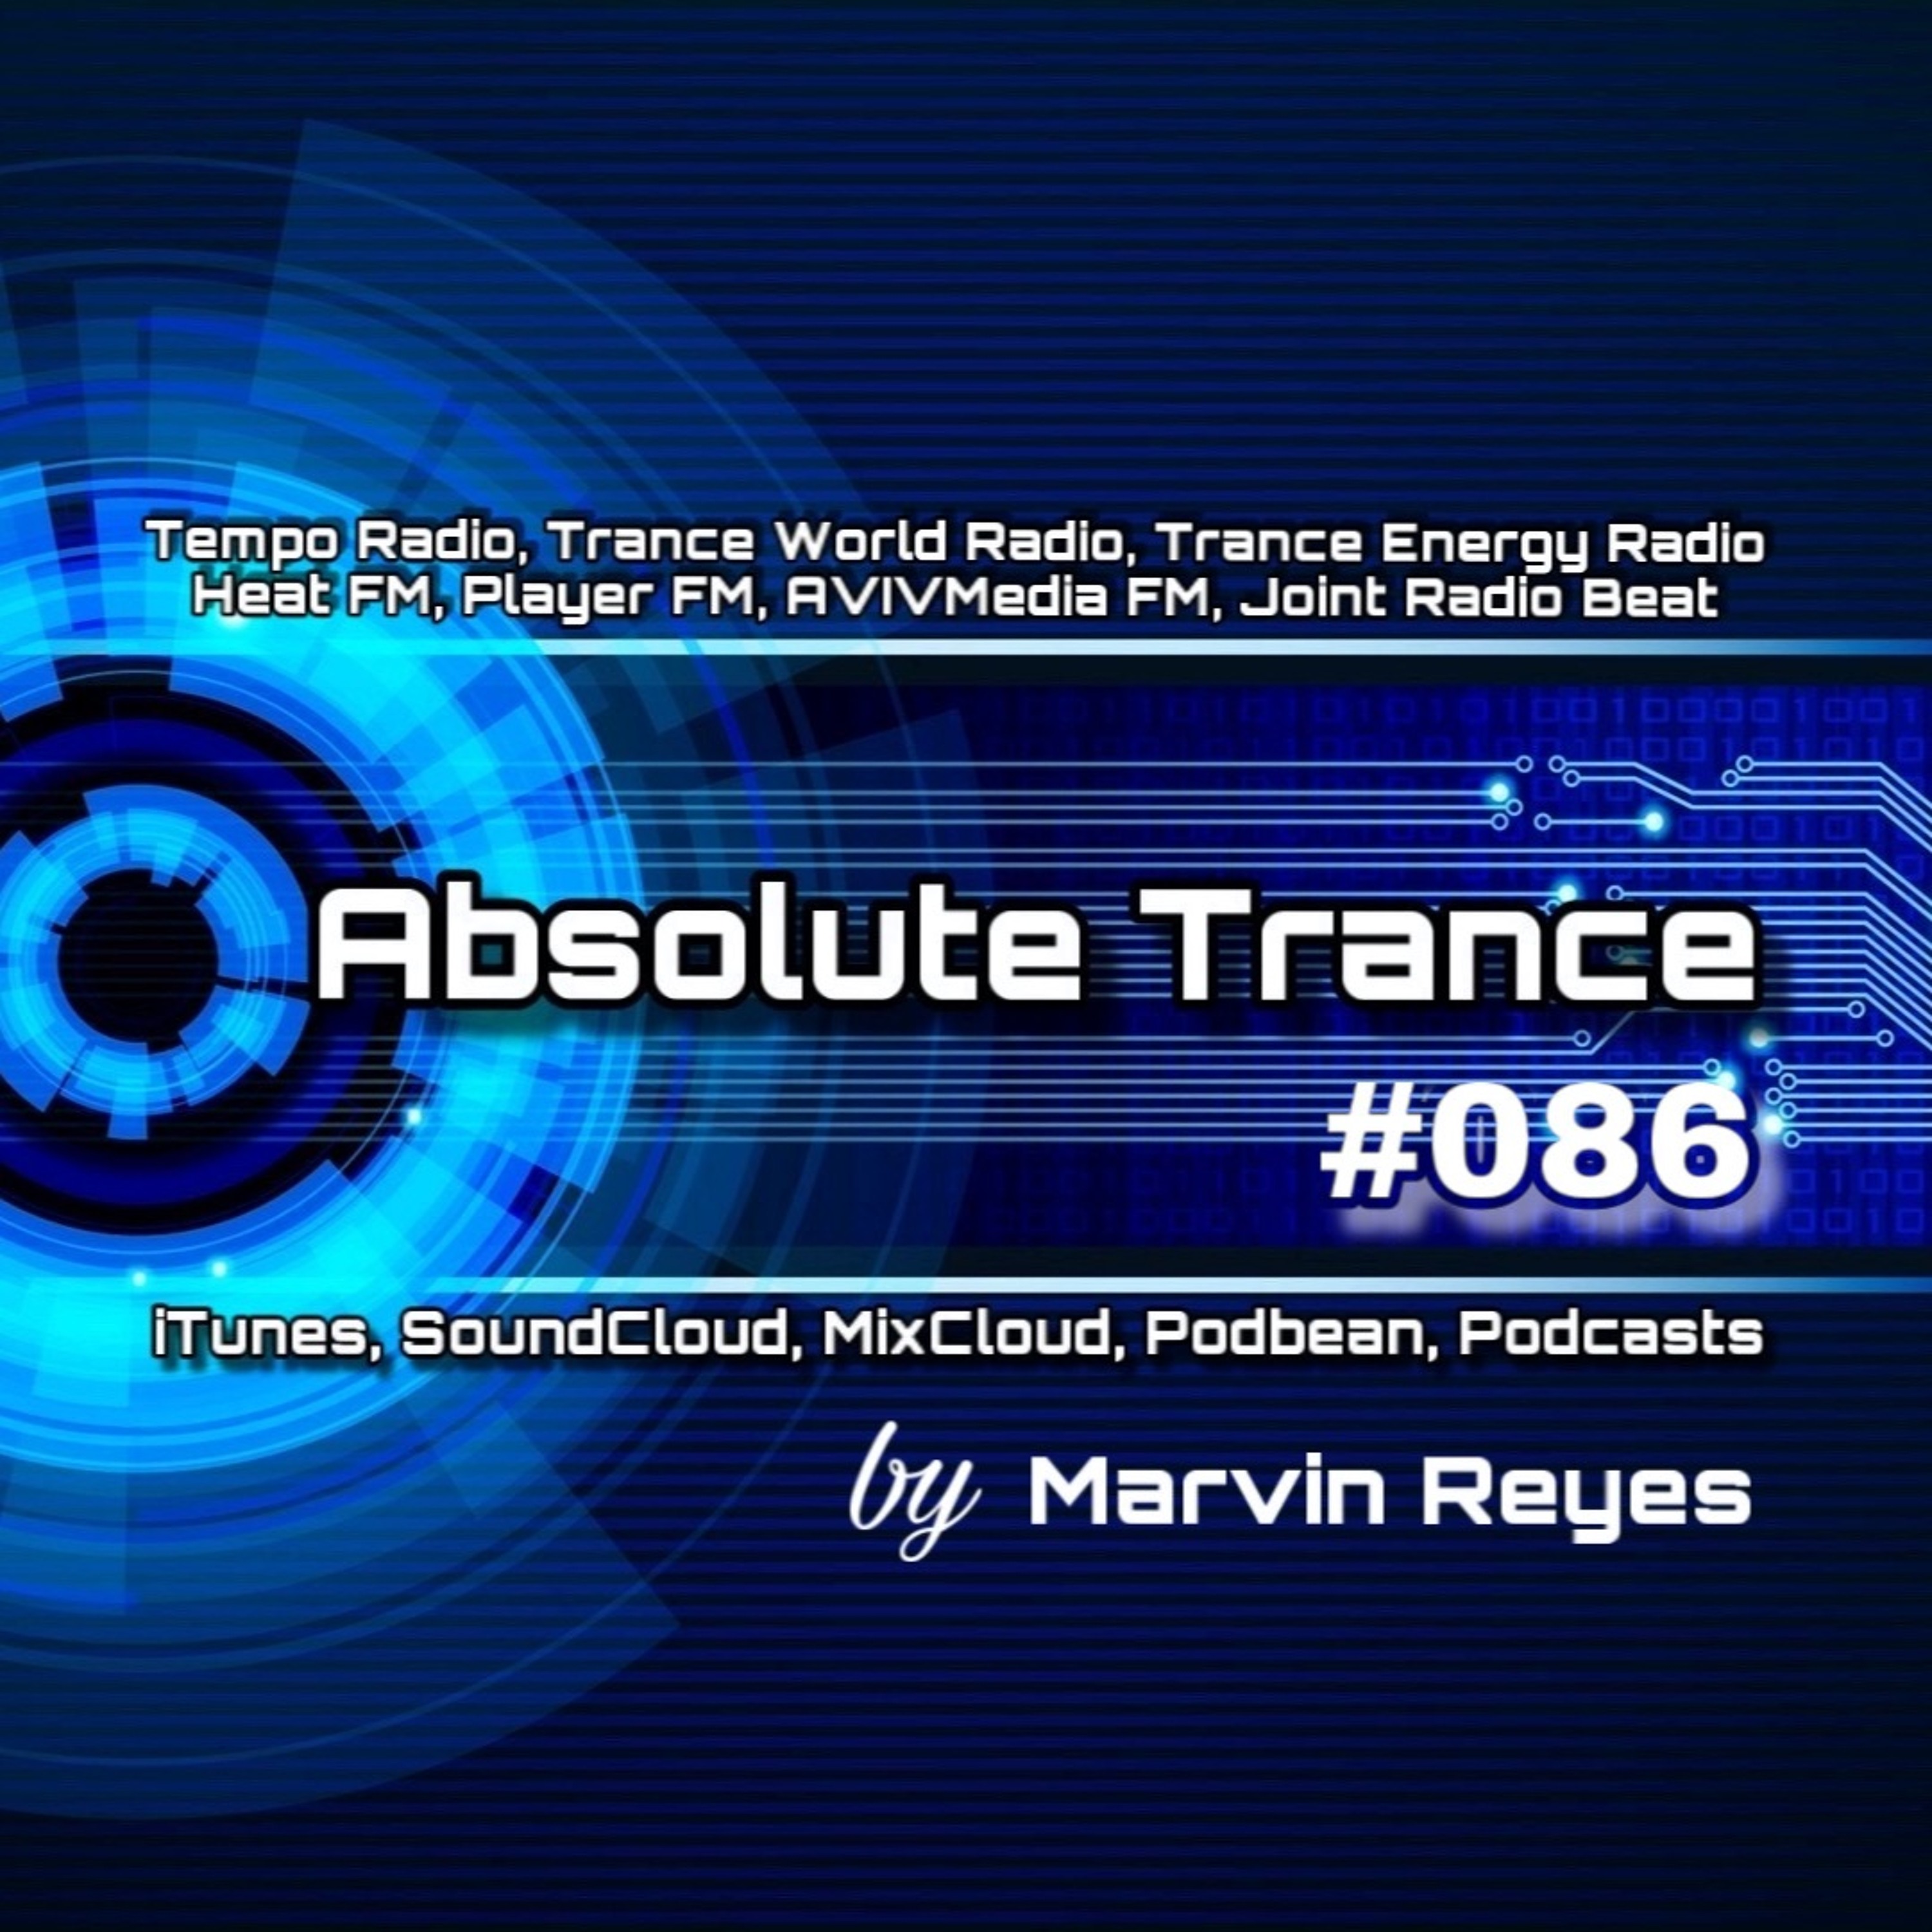 Absolute Trance #086